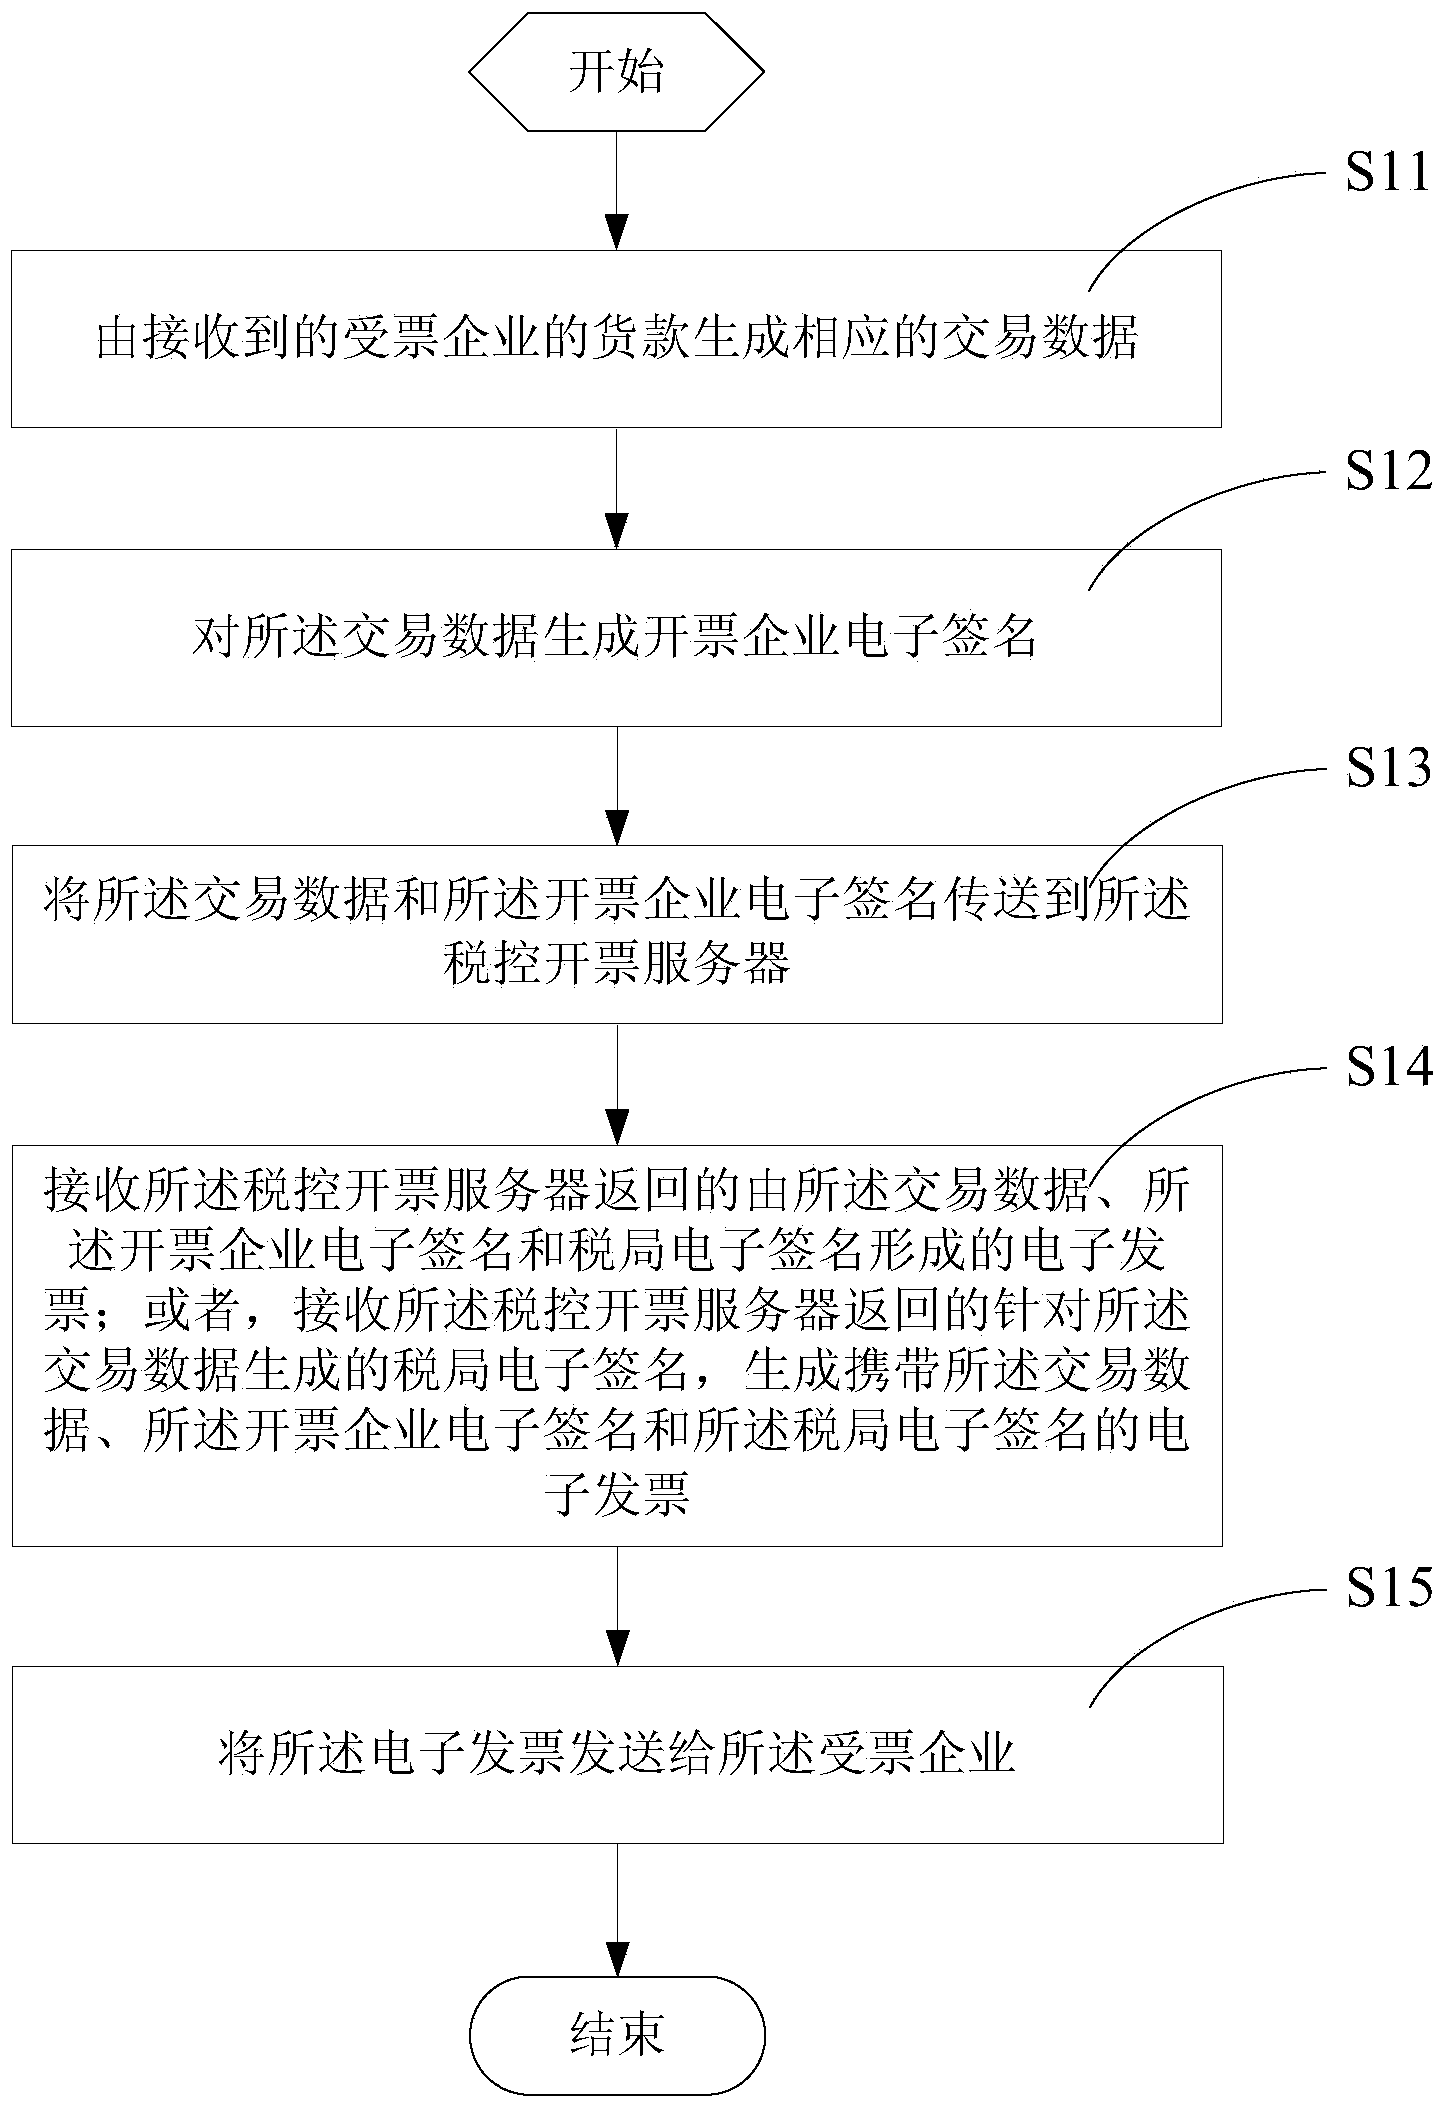 Electronic invoice generating method, device and system